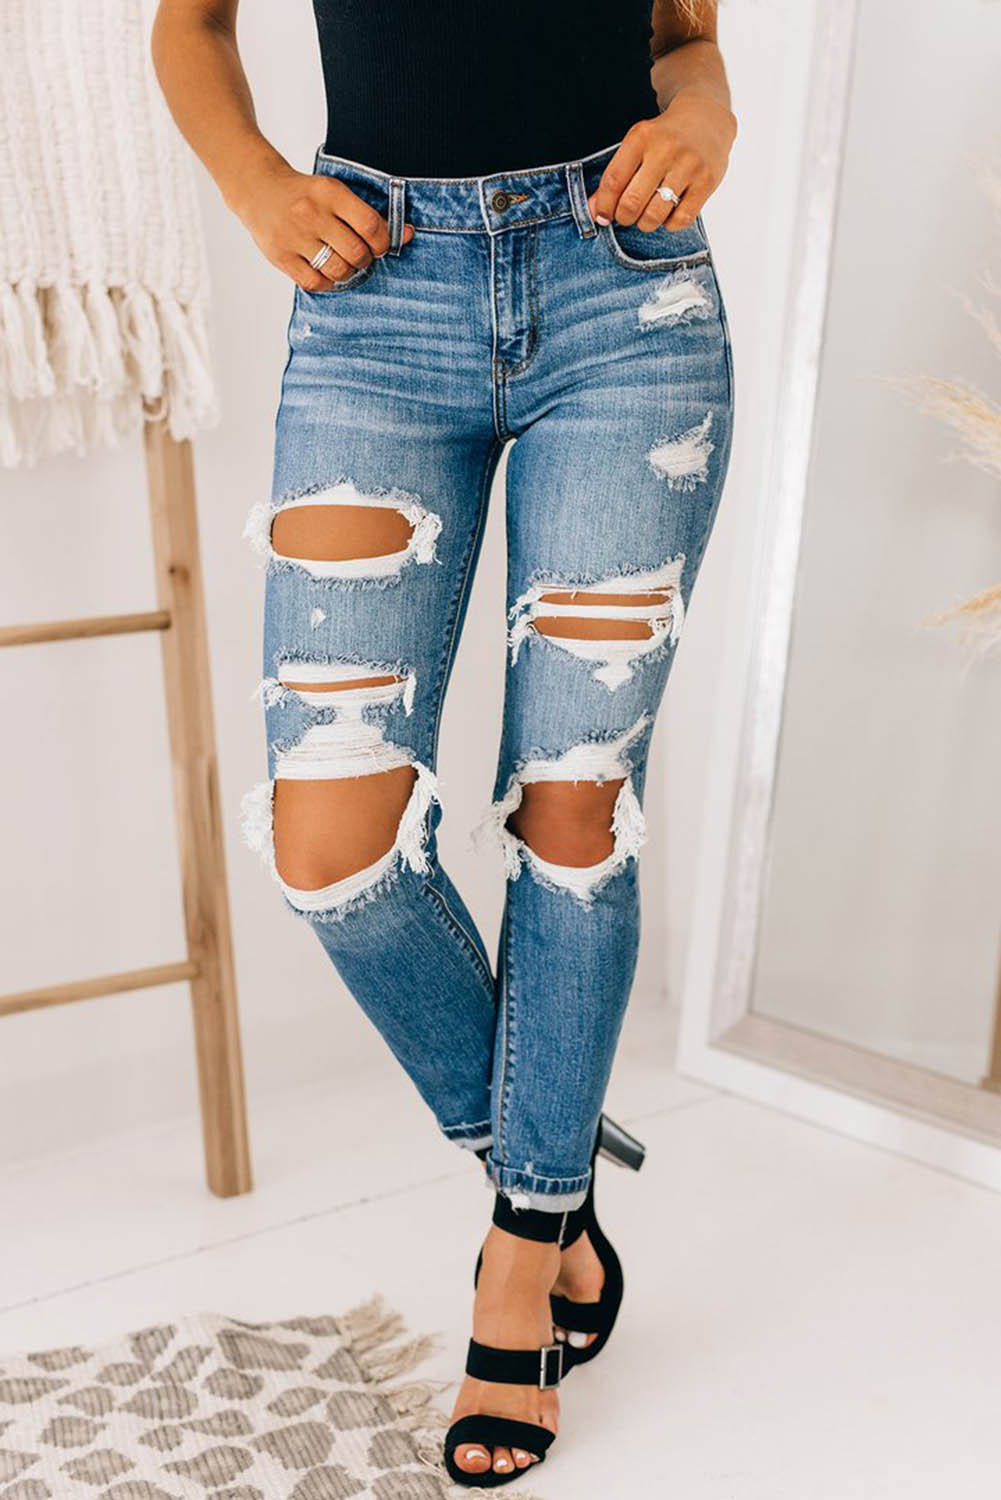 light blue ripped jeans for women